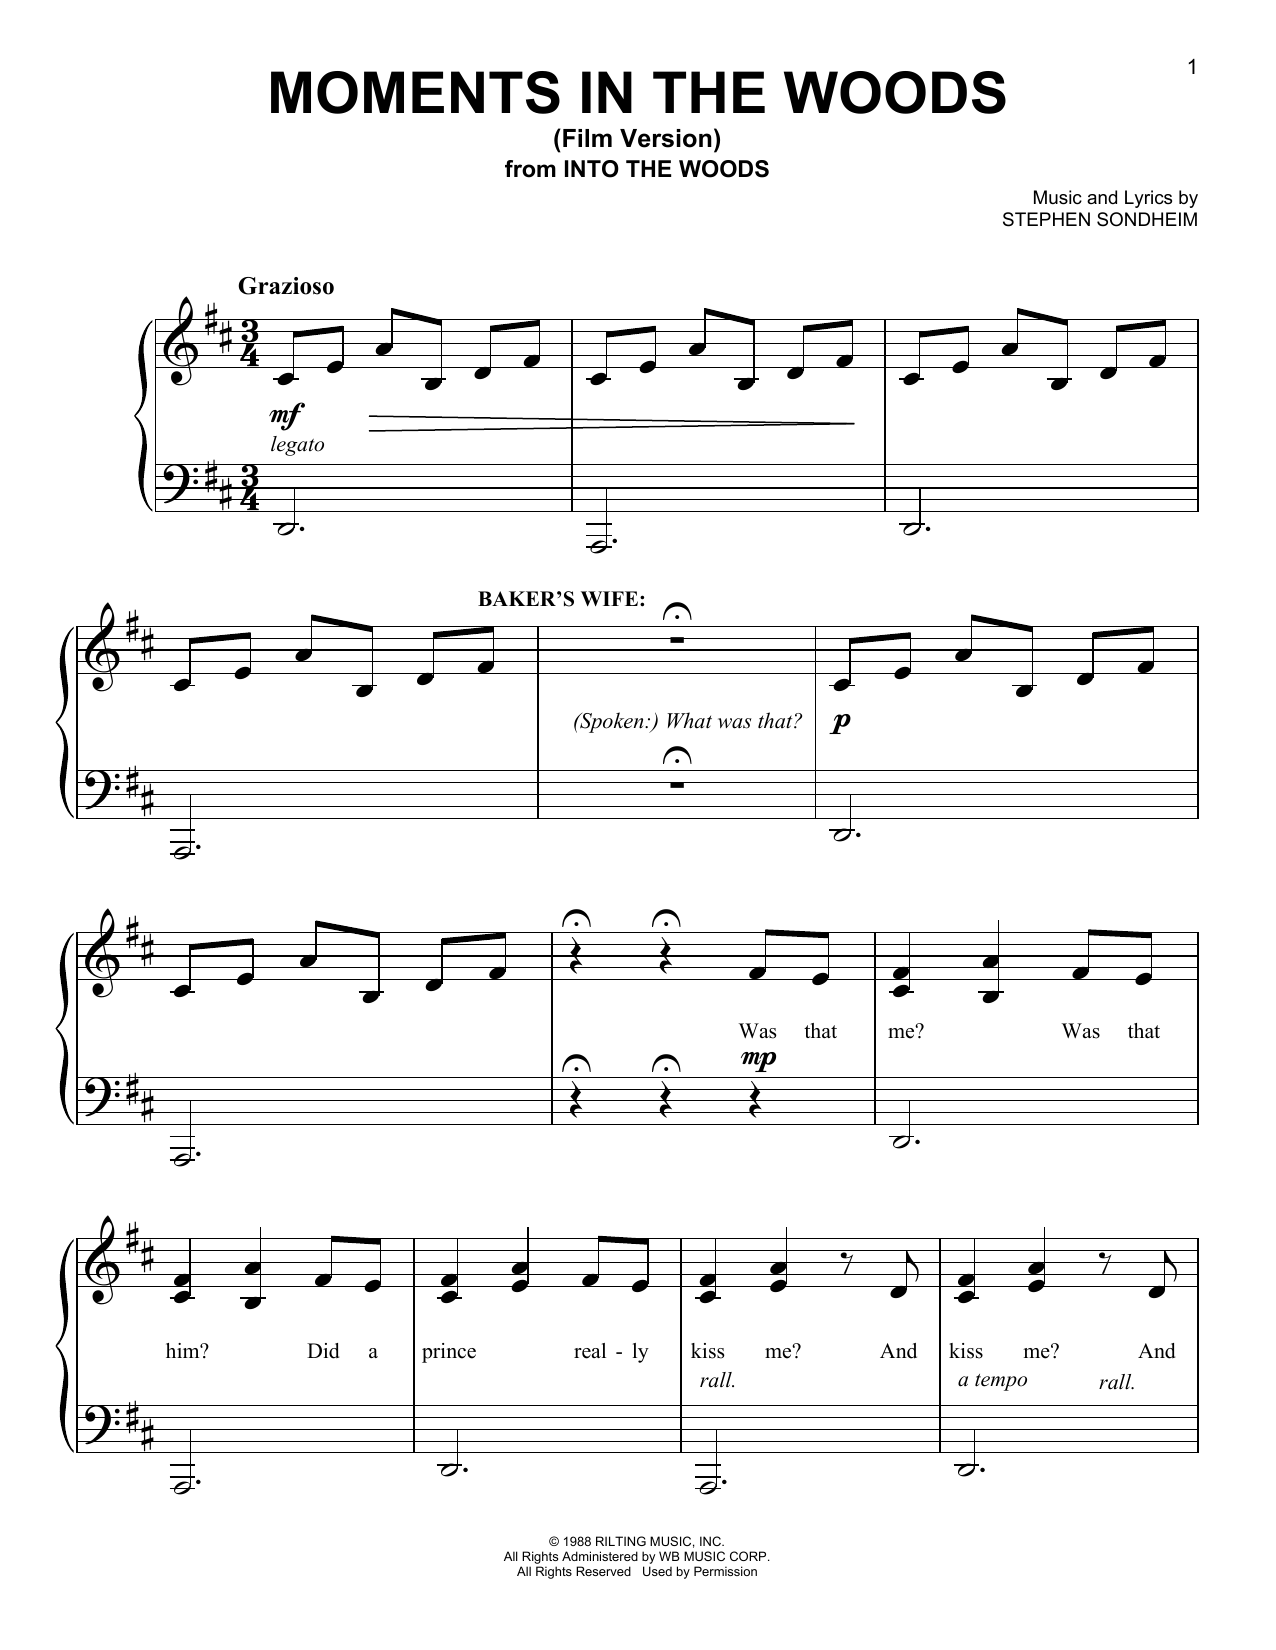 Stephen Sondheim Moments In The Woods Film Version From Into The Woods Sheet Music Pdf 